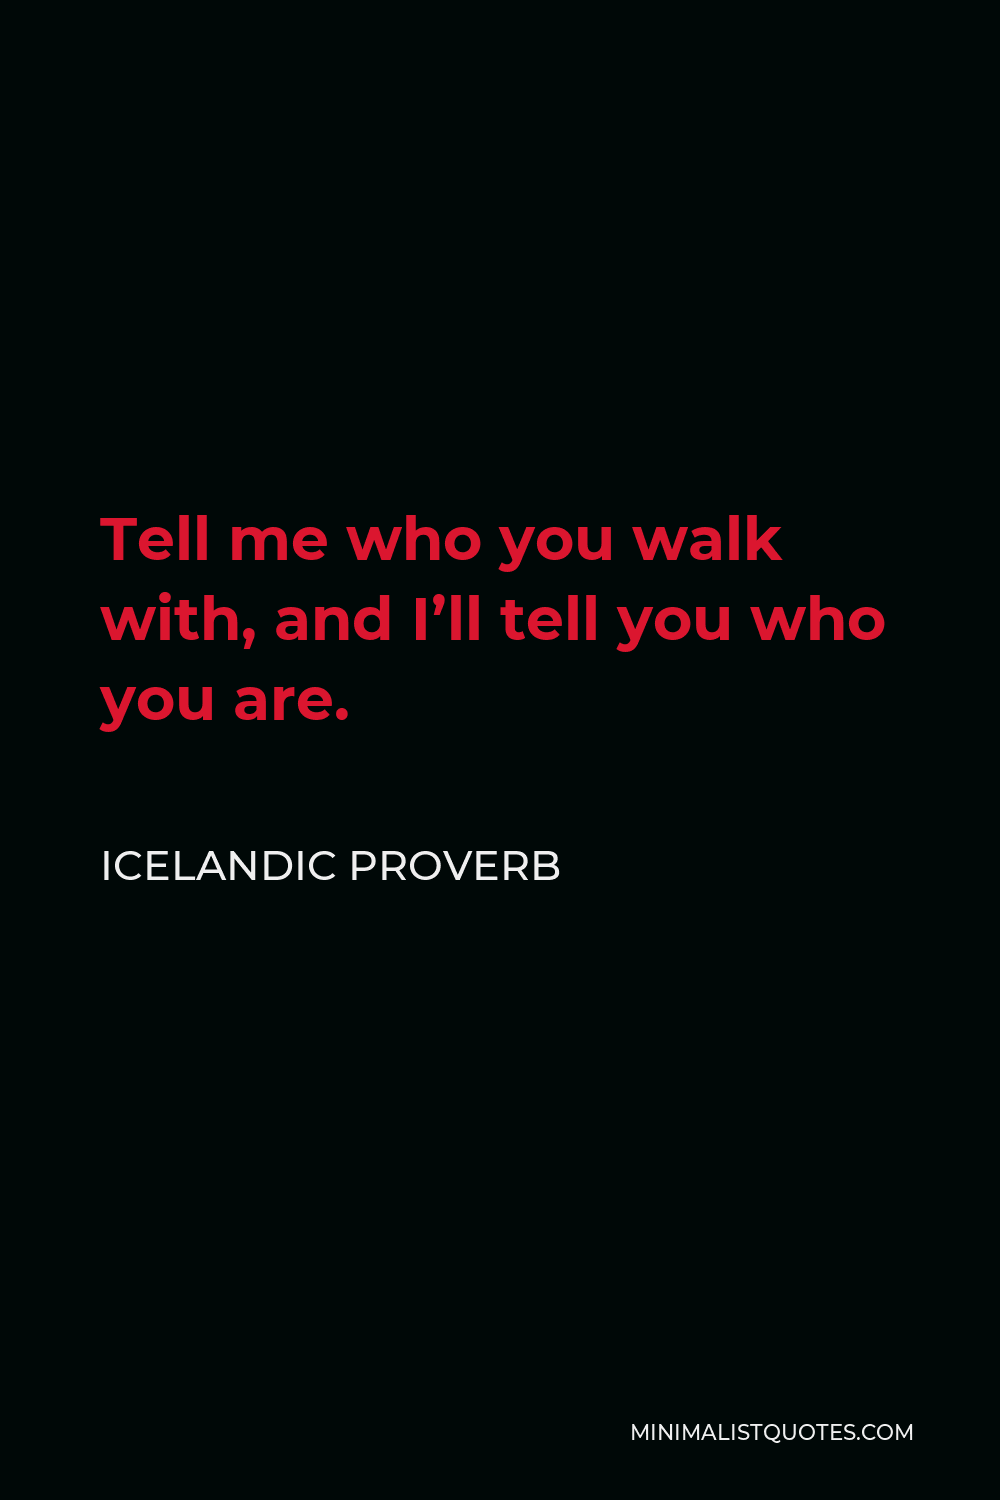 Icelandic Proverb Quote - Tell me who you walk with, and I’ll tell you who you are.